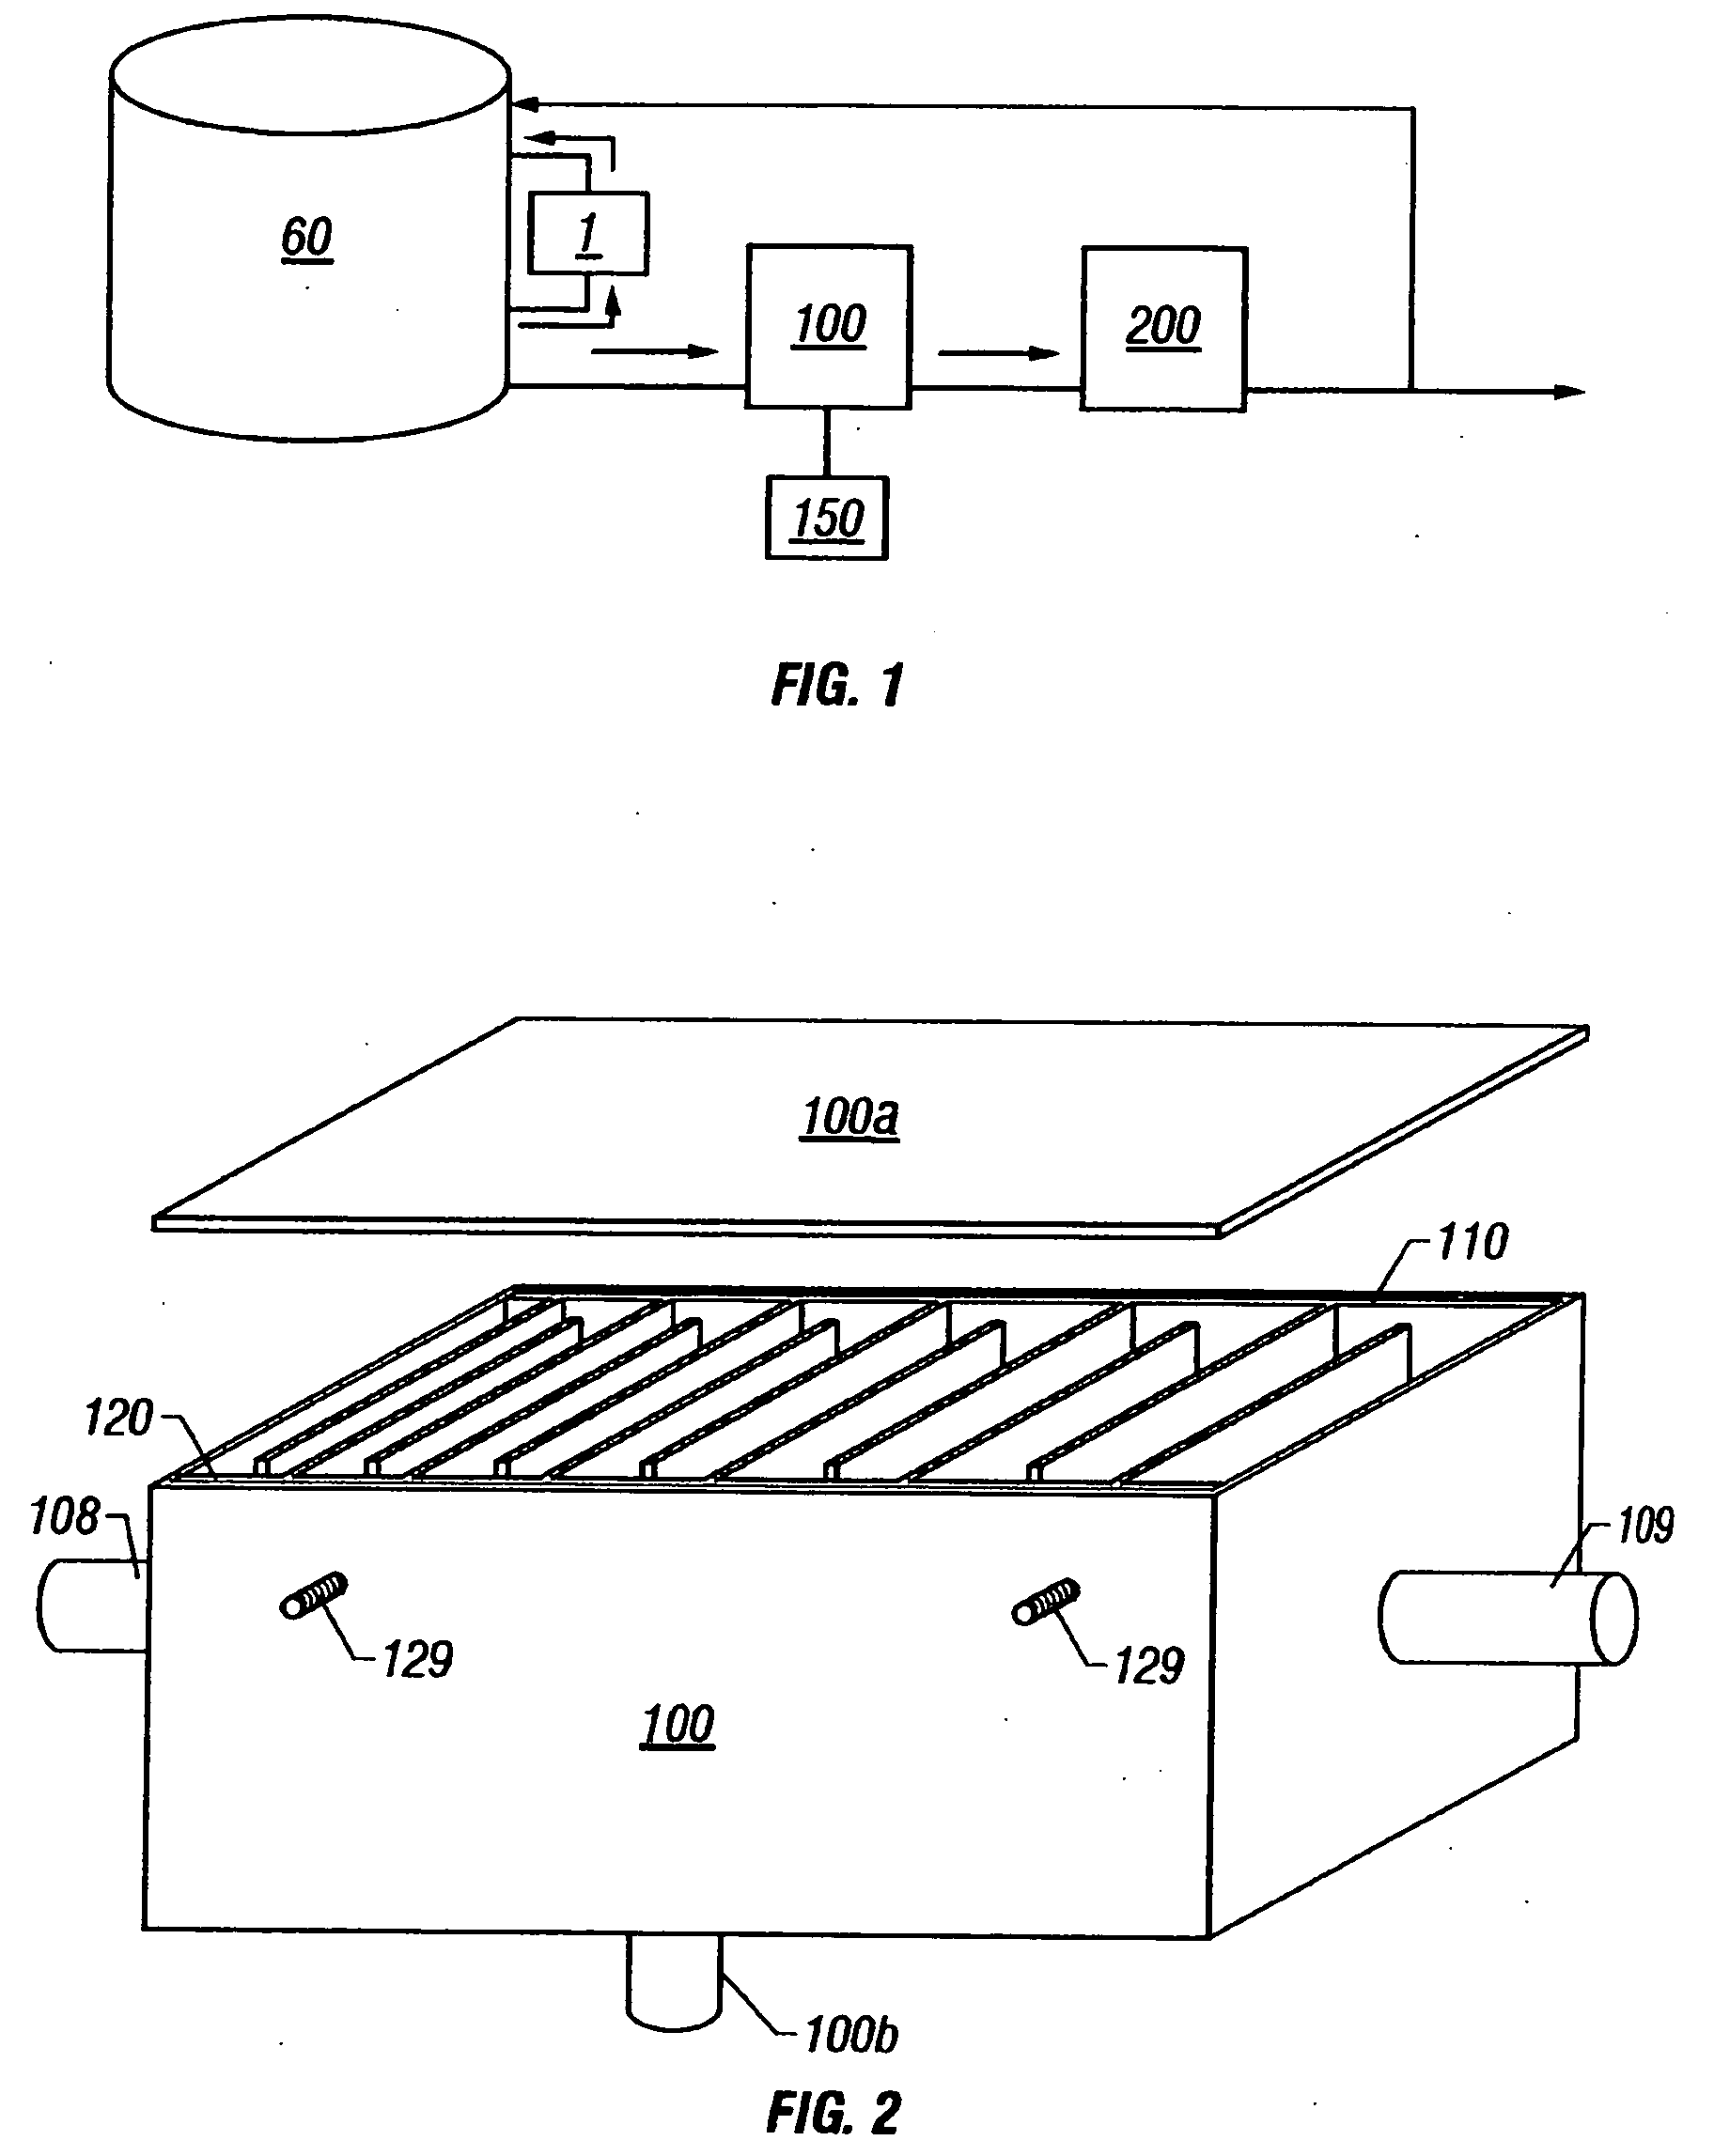 Method and apparatus for removing contaminants from conduits and fluid columns